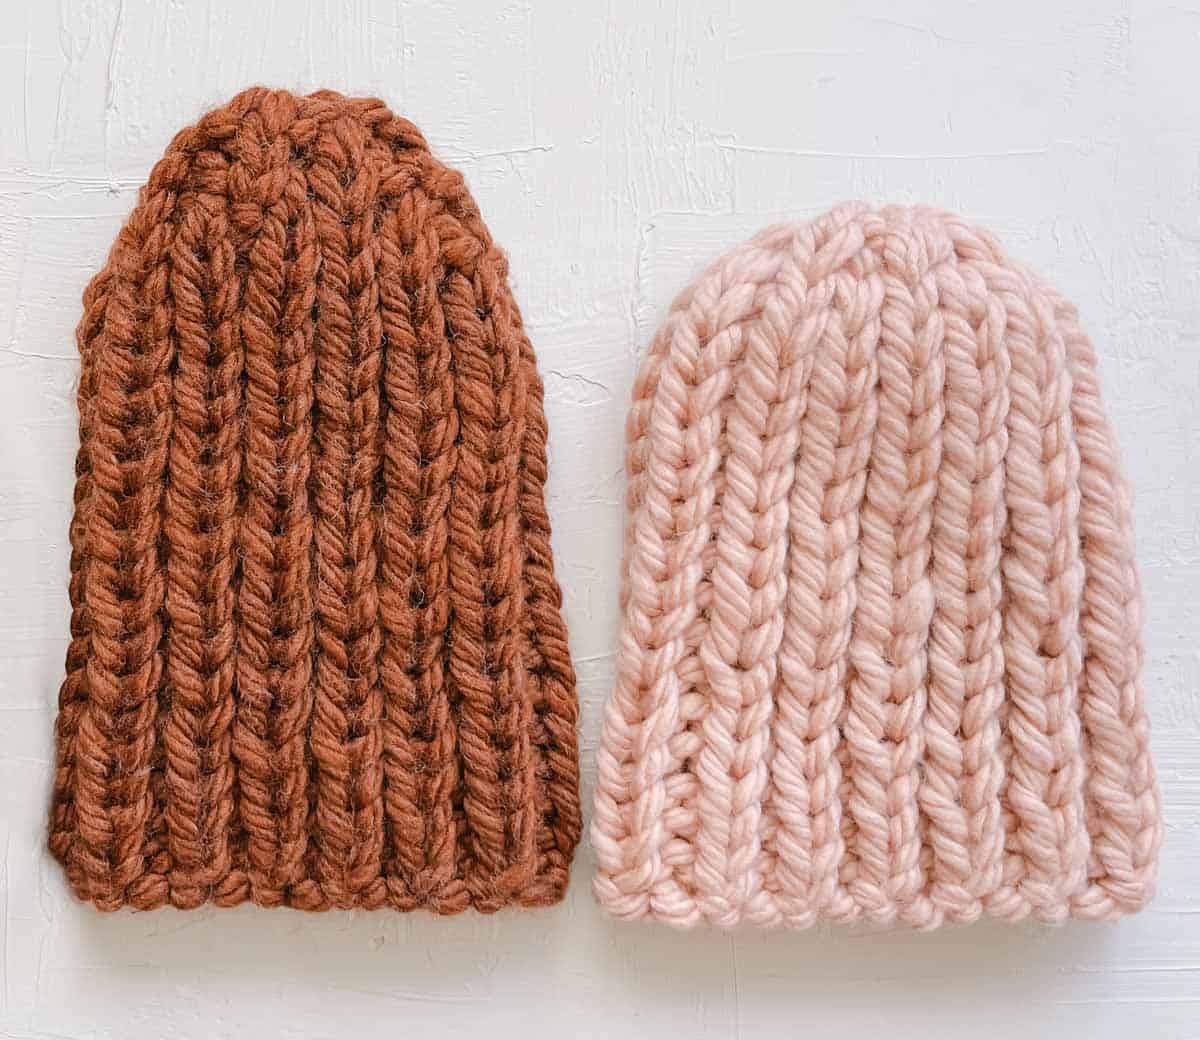 Two bulky knit hats next to each other on a white background.